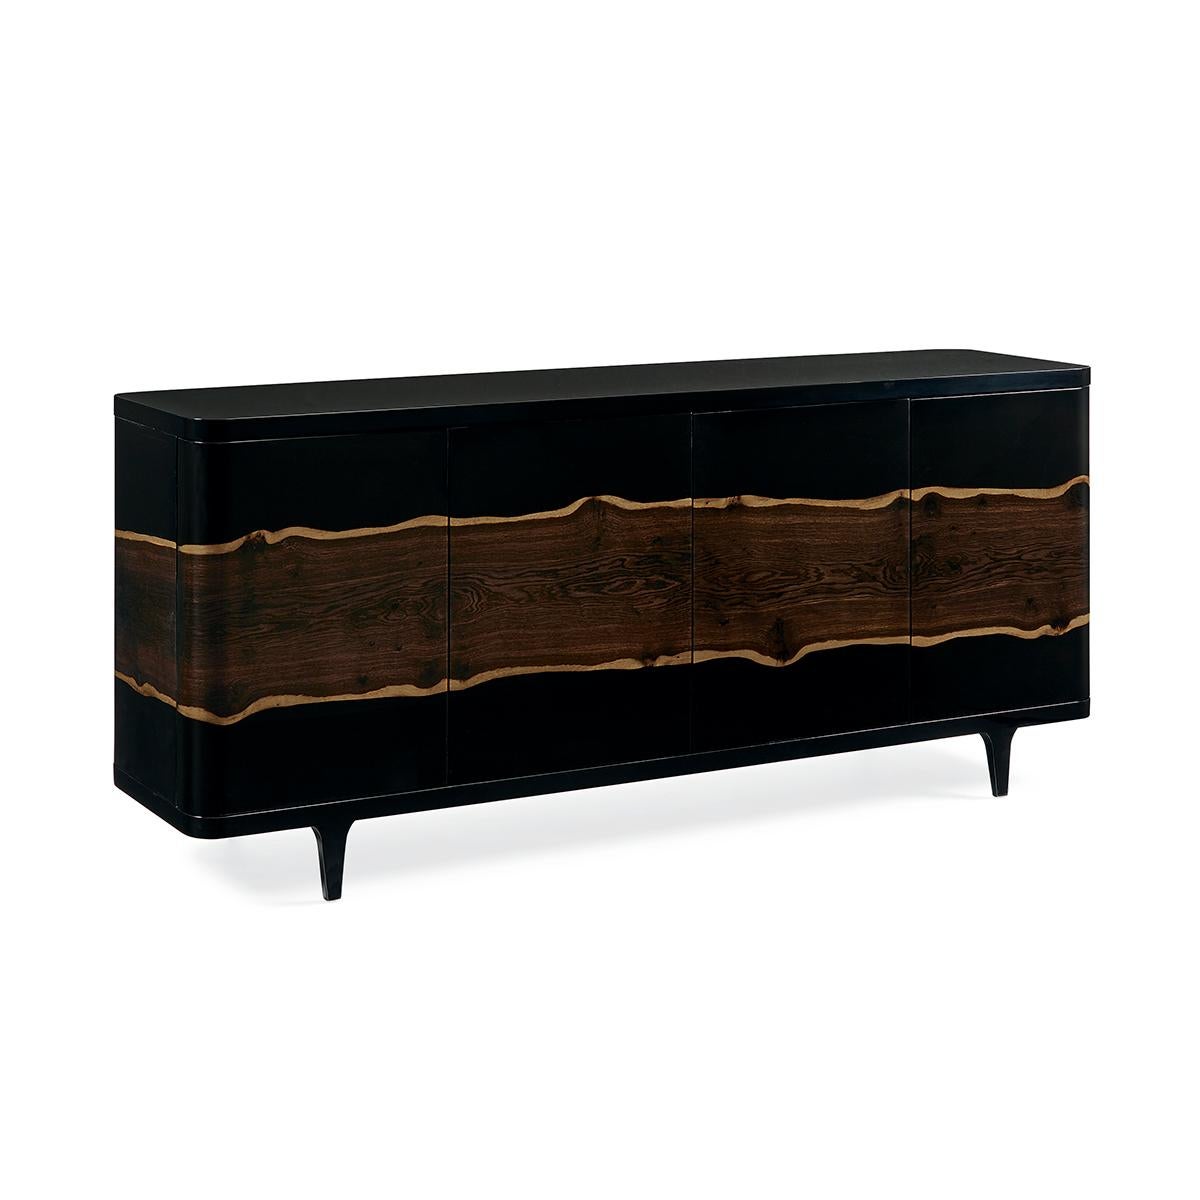 Mid-Century Modern Natural Buffet, this awe-inspiring buffet celebrates the authentic beauty of a slice of an Oak tree. A Piano Black case is inset with a striking band of live edge fumed oak that dramatically wraps around its entire façade. Lifted